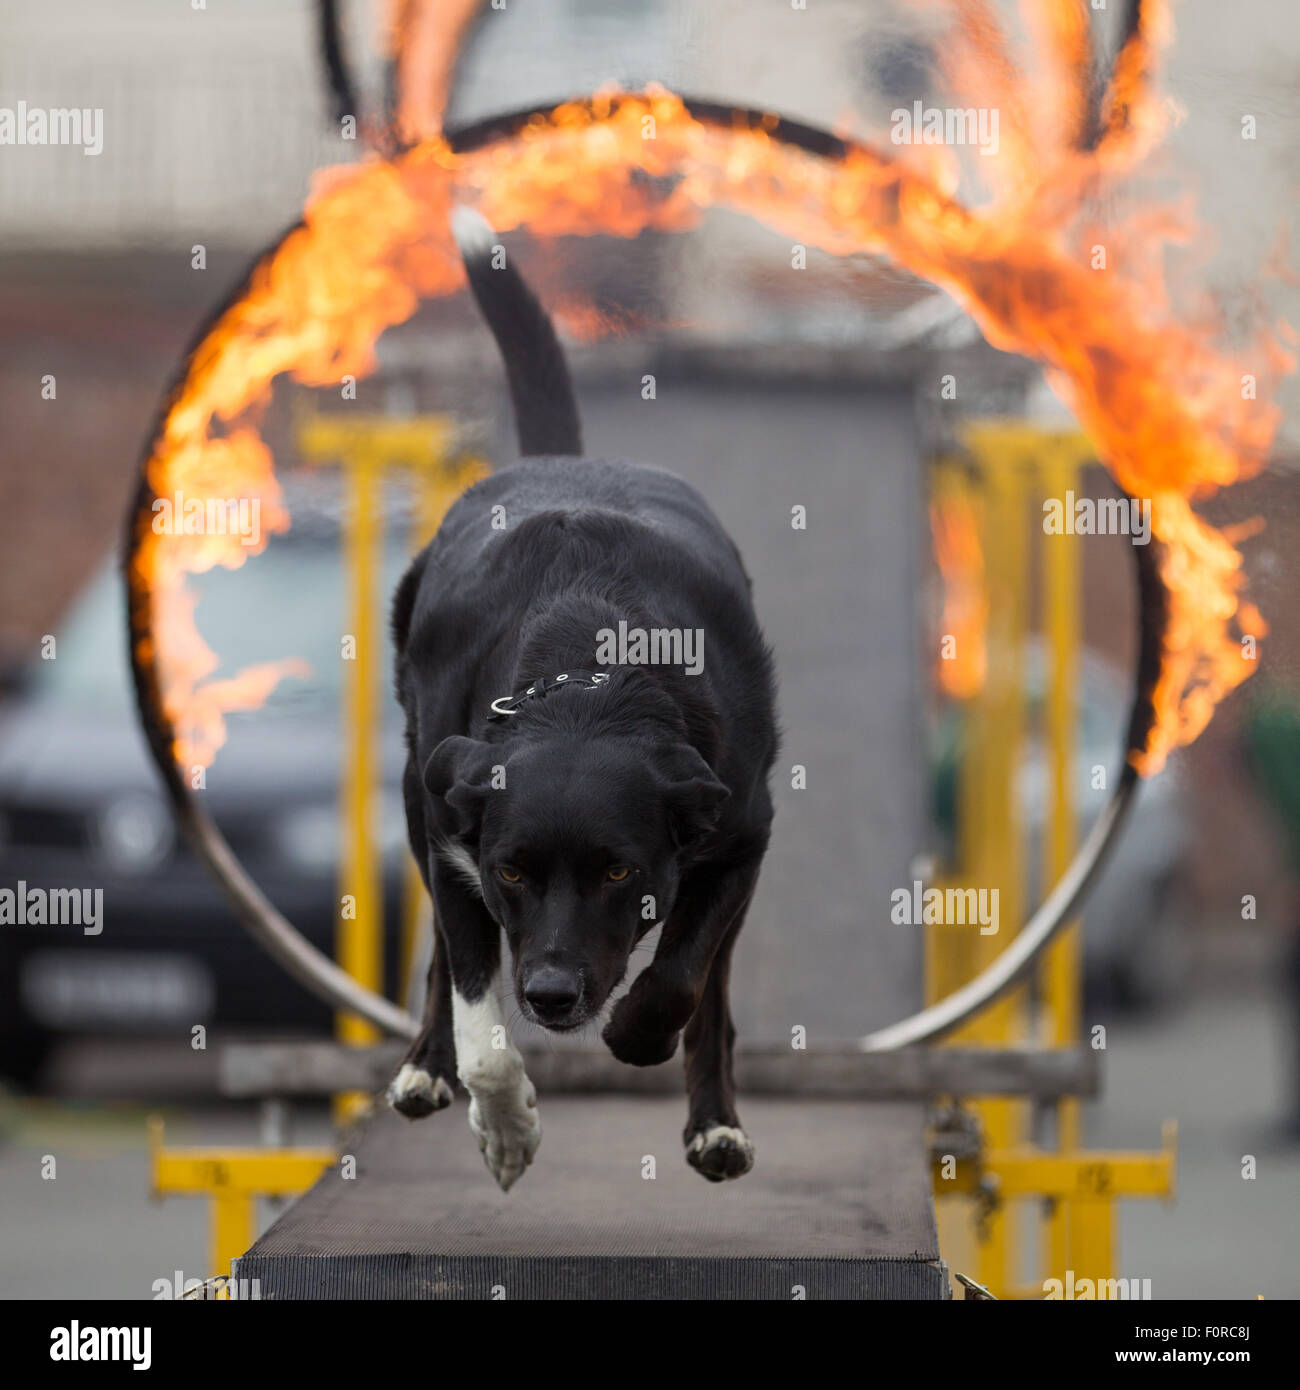 A dog jumps through a flaming hoop during an agility display Stock Photo